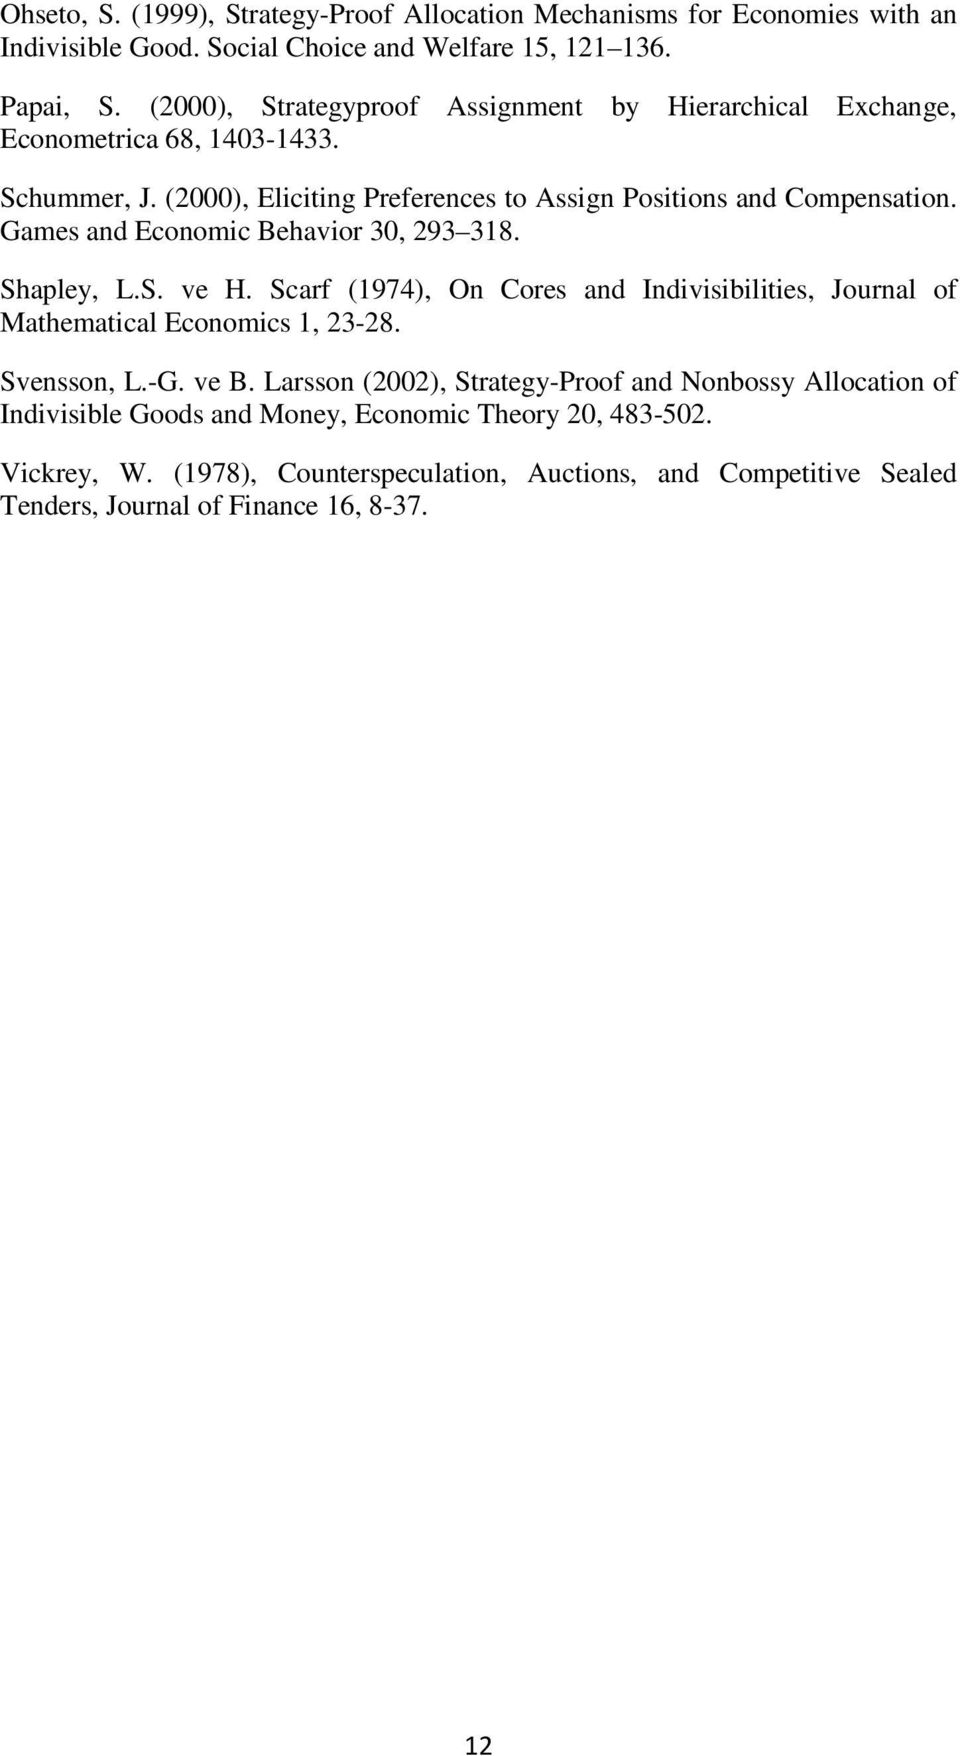 Games and Economic Behavior 30, 293 318. Shapley, L.S. ve H. Scarf (1974), On Cores and Indivisibilities, Journal of Mathematical Economics 1, 23-28. Svensson, L.-G. ve B.